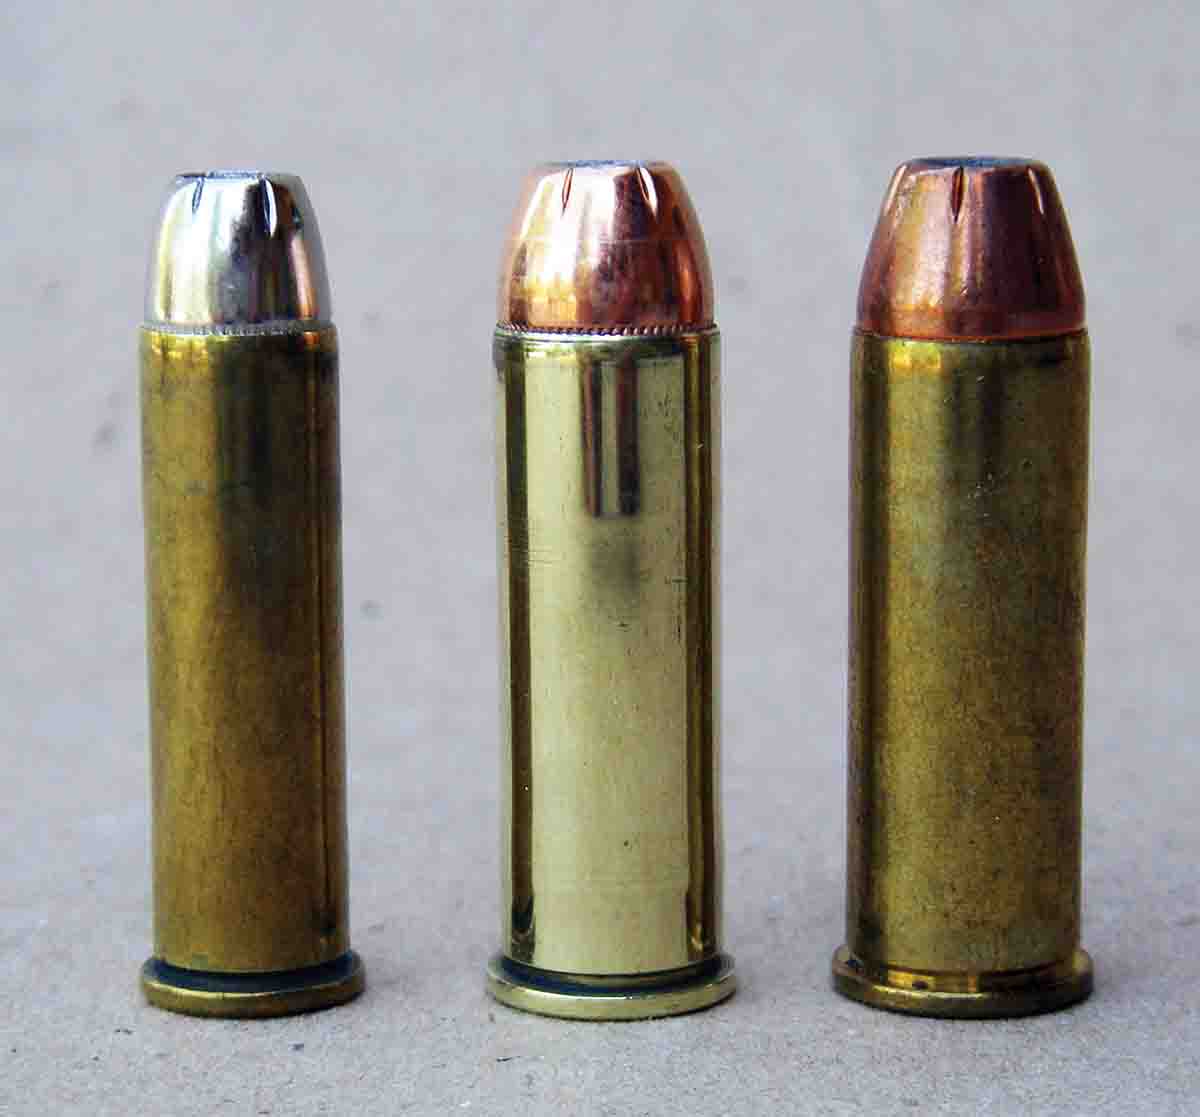 The .41 Magnum (center) offers performance sandwiched between the .357 Magnum (left) and .44 Magnum (right). However, actual performance is closer to the .44 Magnum.